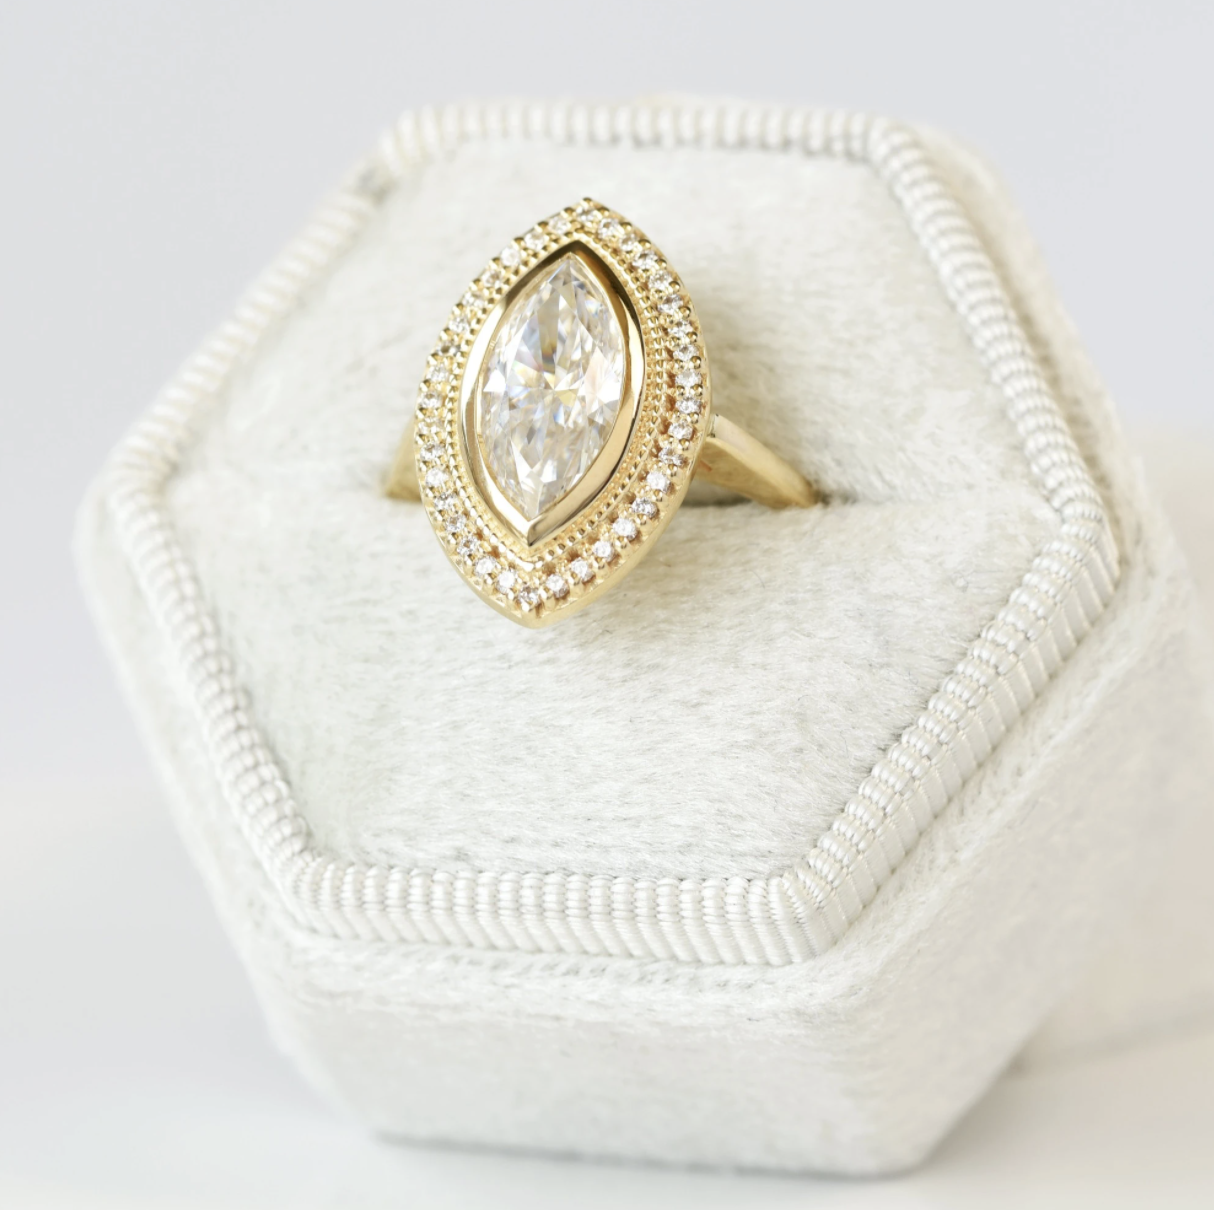 halo ring in rose gold setting with smaller diamonds around center piece